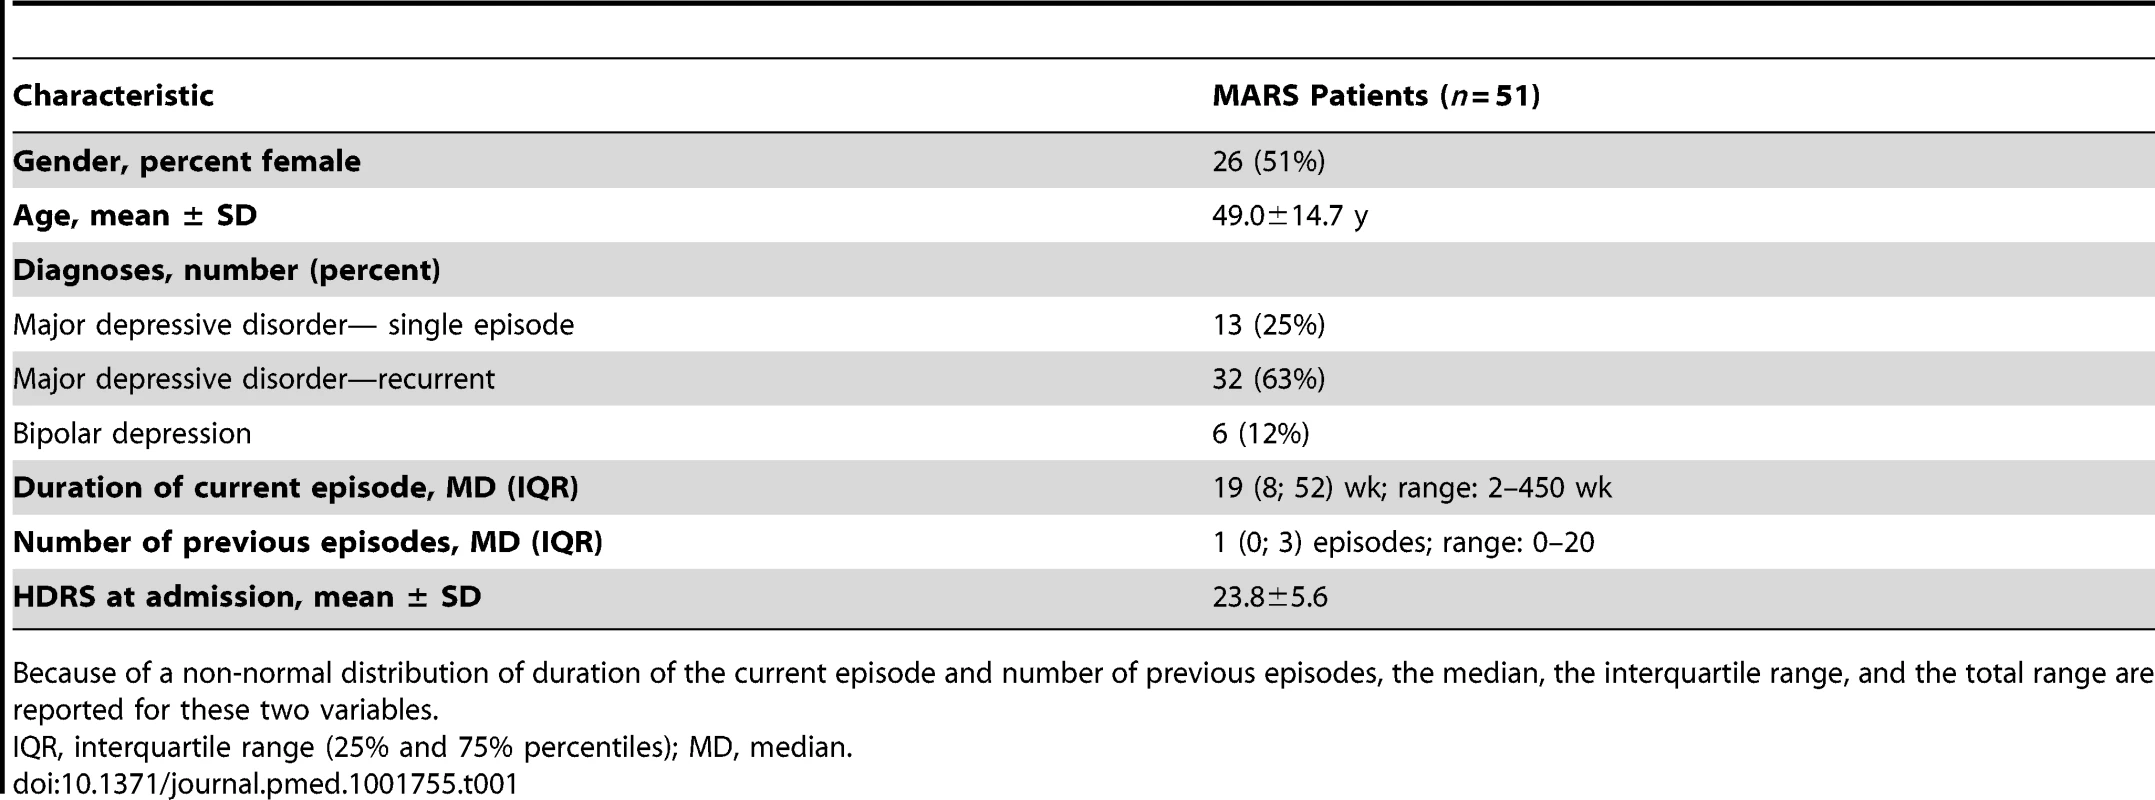 Demographic and clinical characteristics of the MARS patient sample.